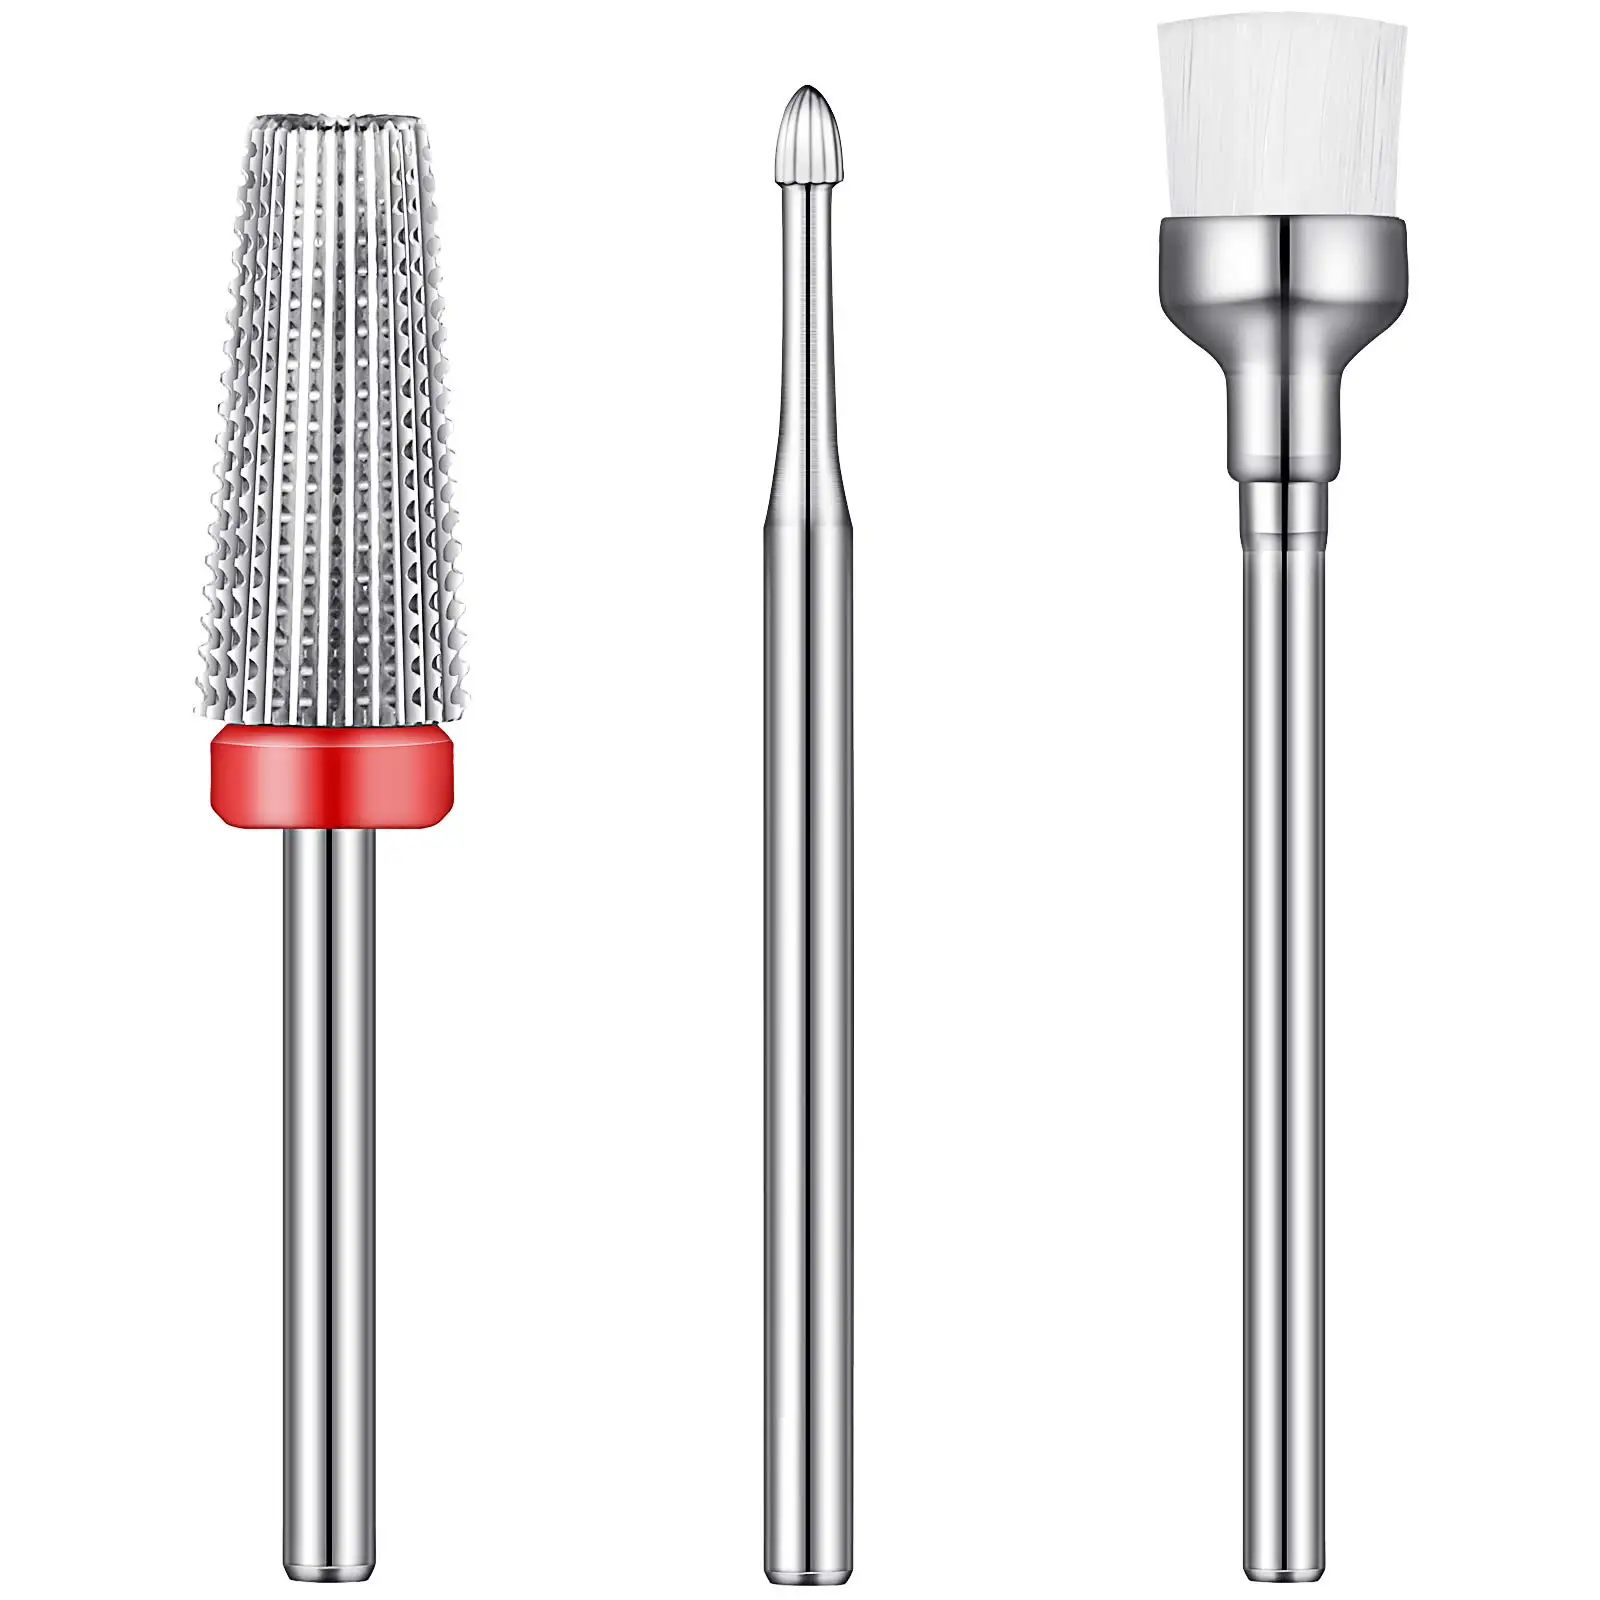 3 Pieces Nail Drill Bits Set Nail Carbide 5 in 1 Bit Silver-Snake Head Gel Nails Cuticle Clean Brush Bit